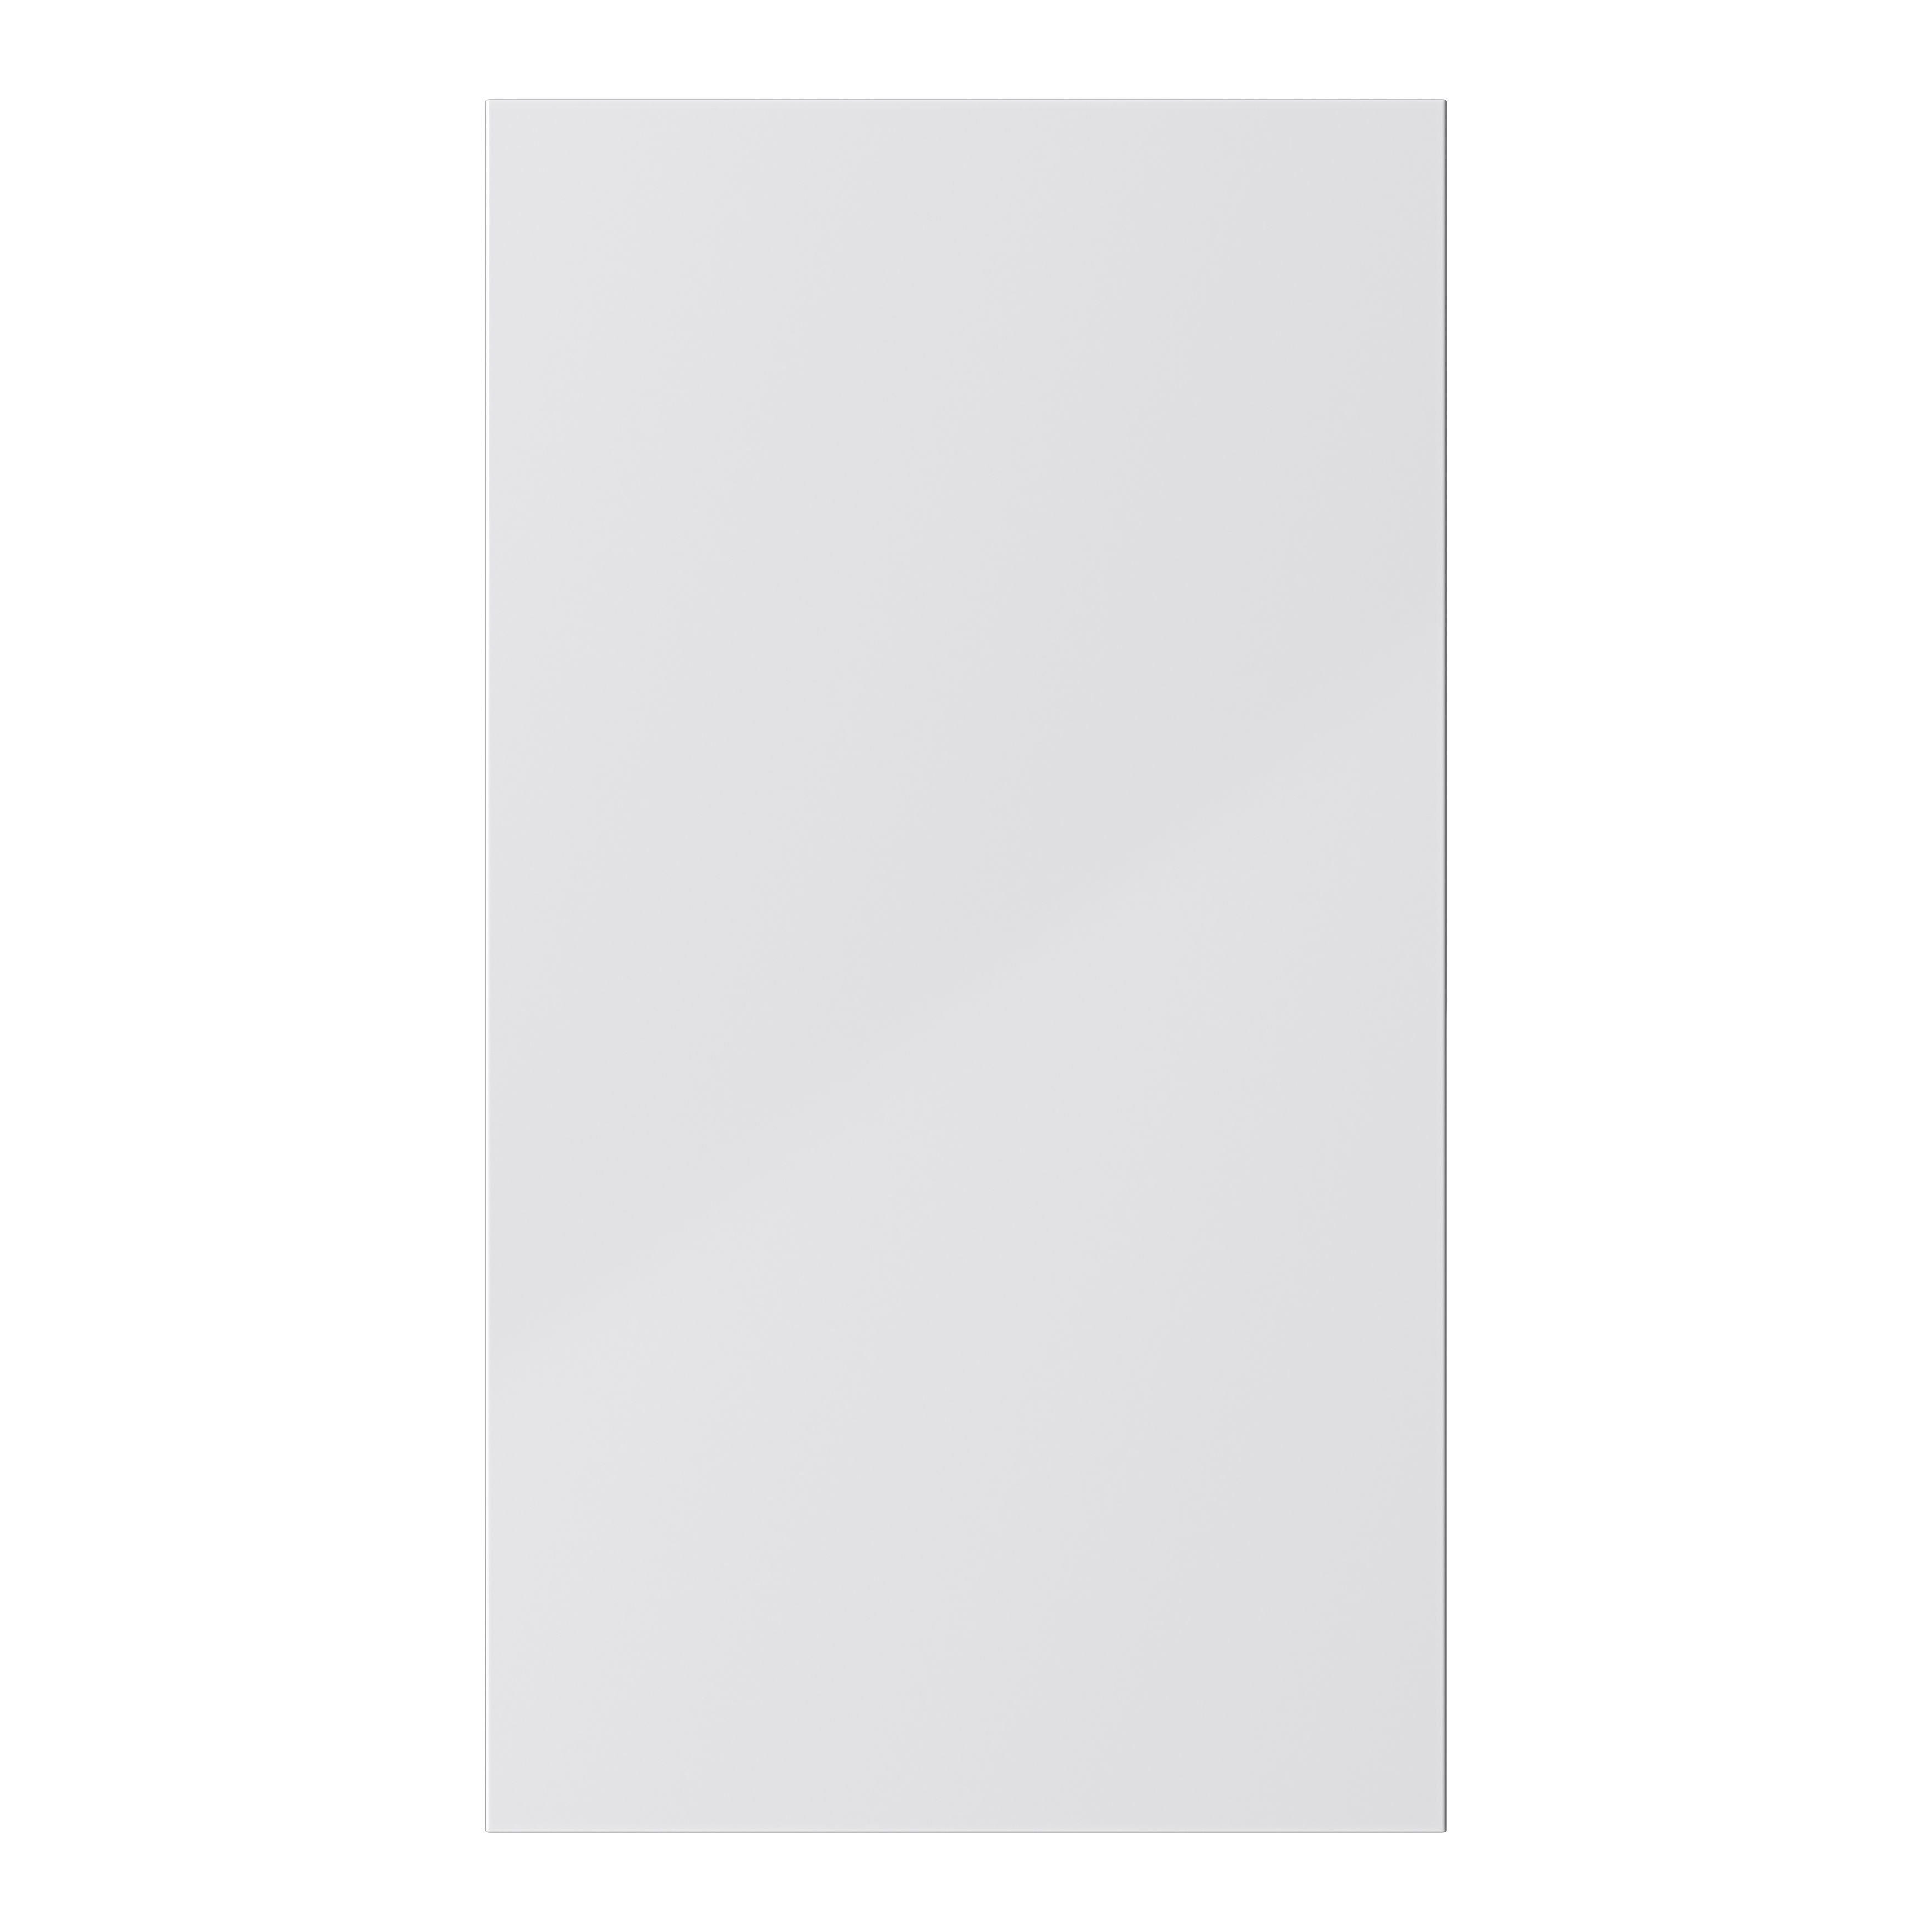 GoodHome Stevia Gloss grey slab Drawerline door & drawer front, (W)400mm (H)715mm (T)18mm